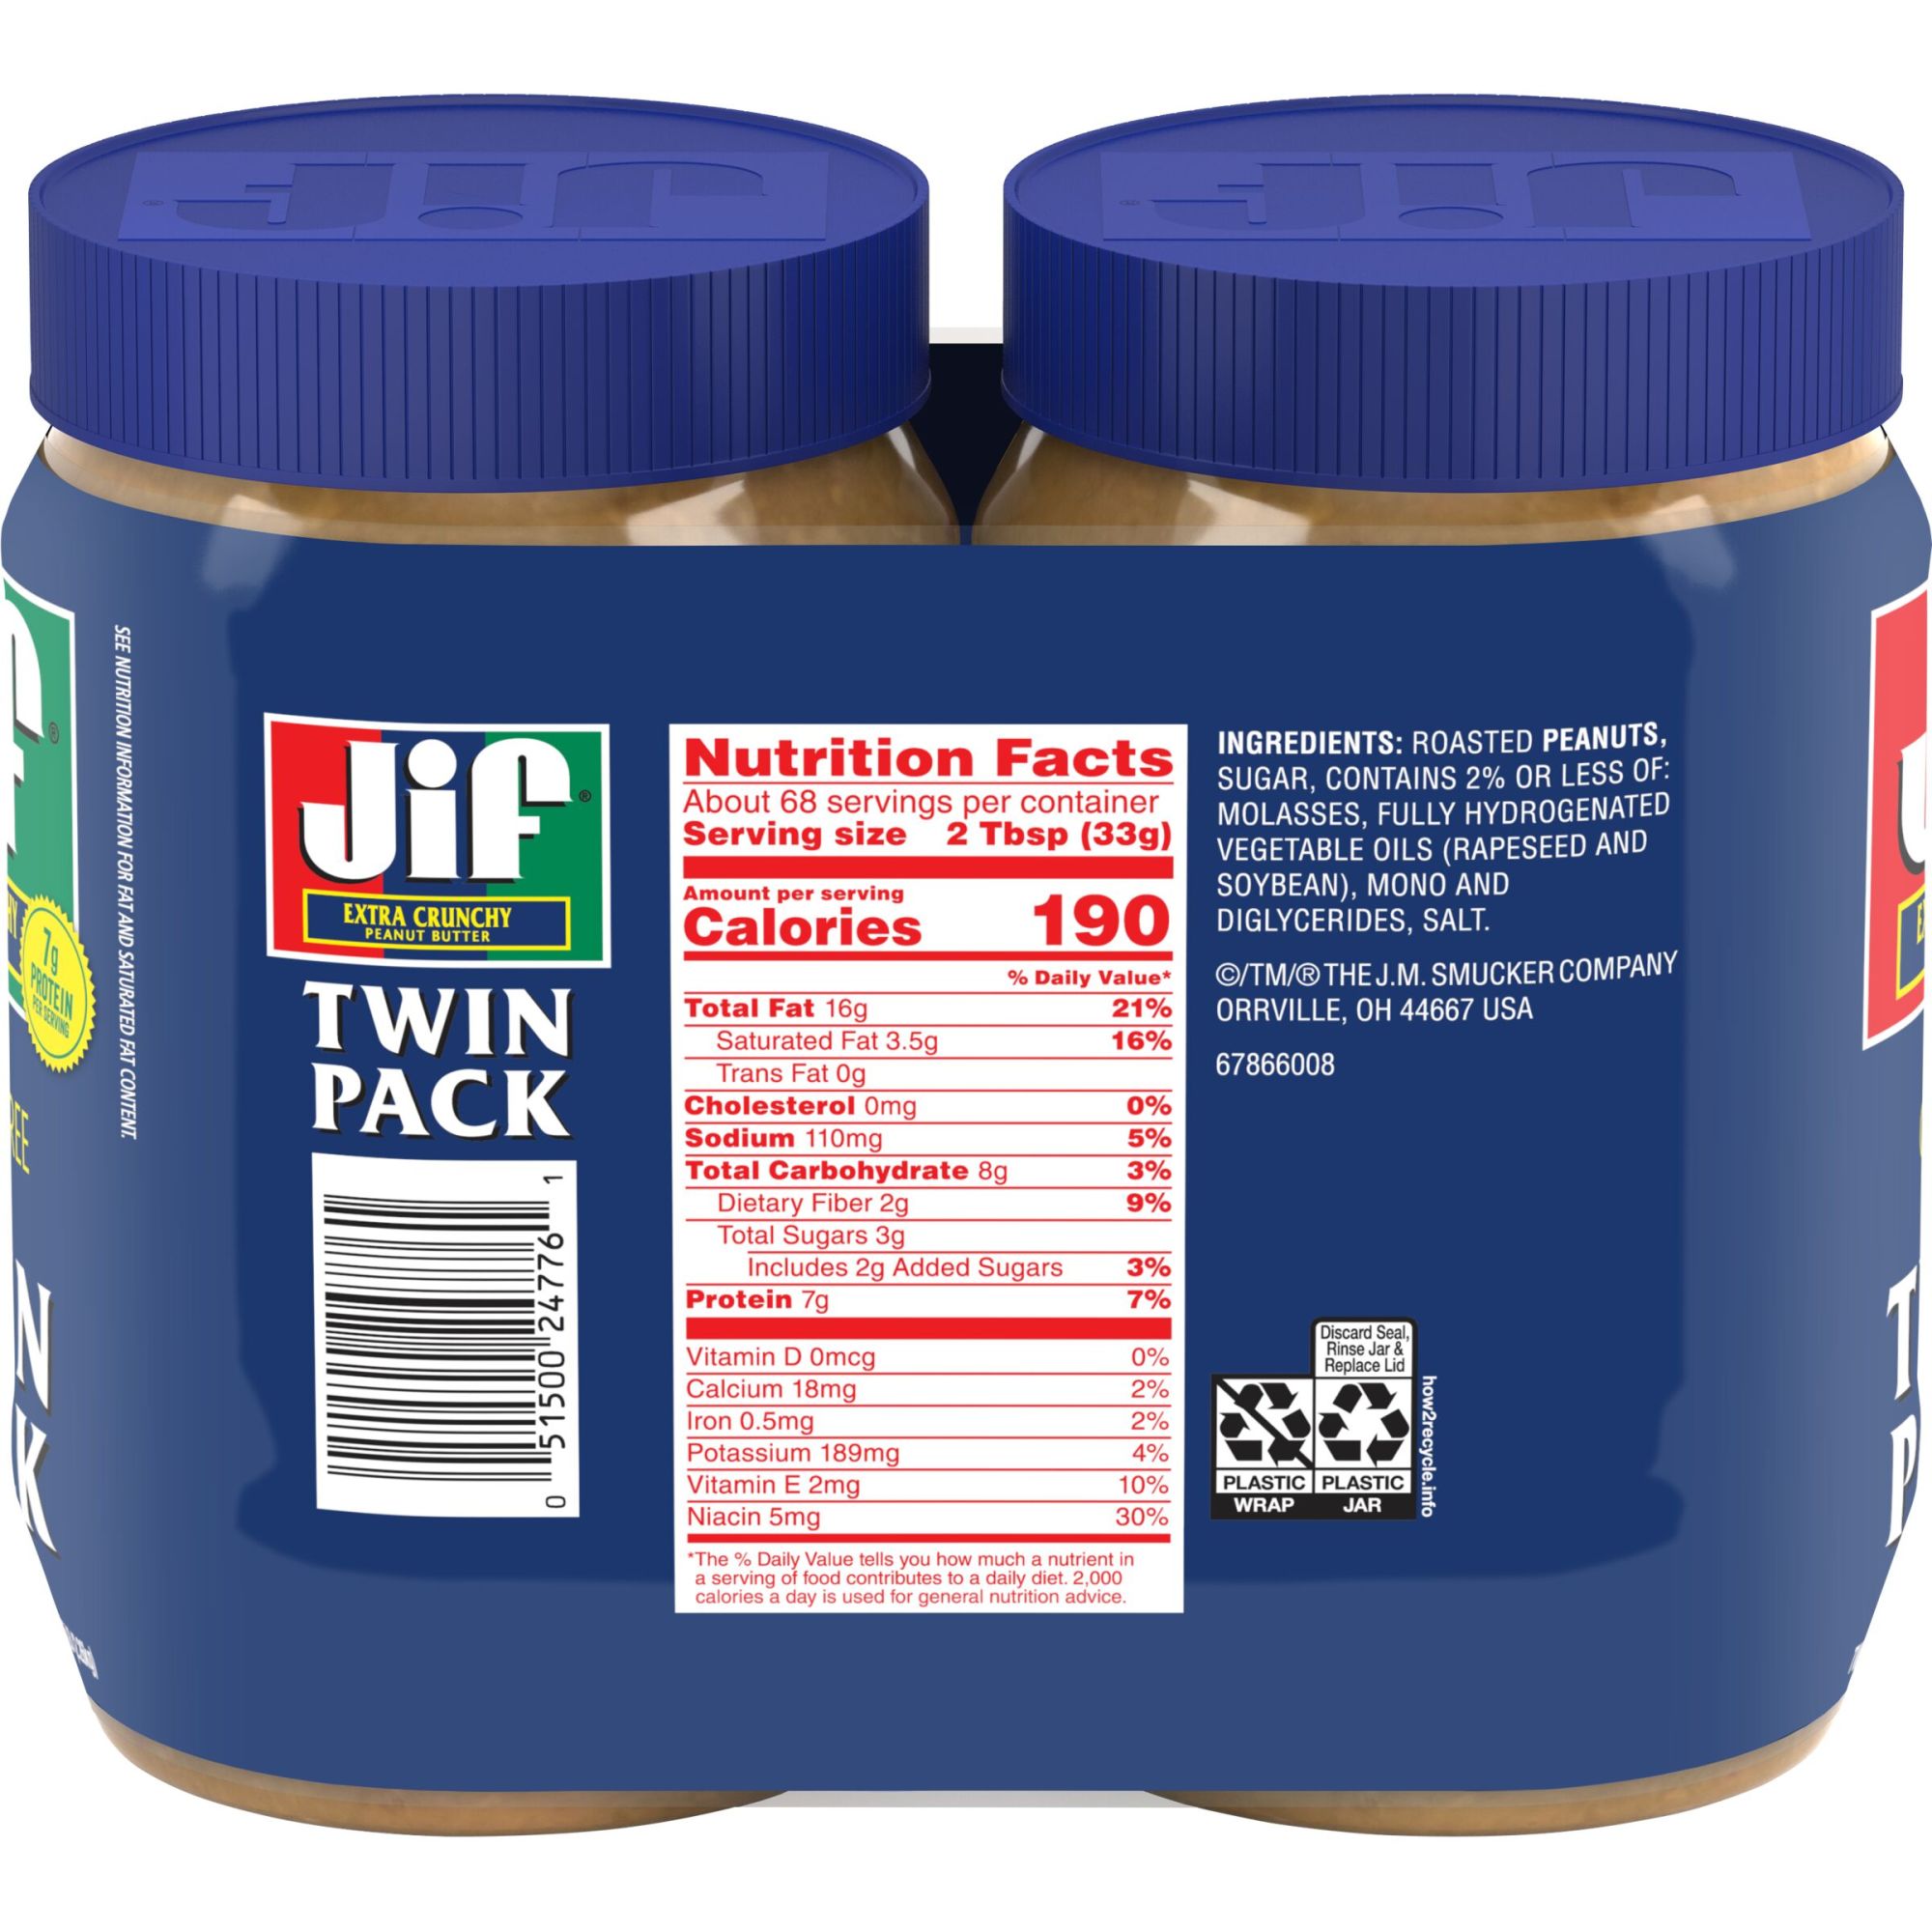 Jif Extra Crunchy Peanut Butter Twin Pack, 80-Ounce - image 3 of 8